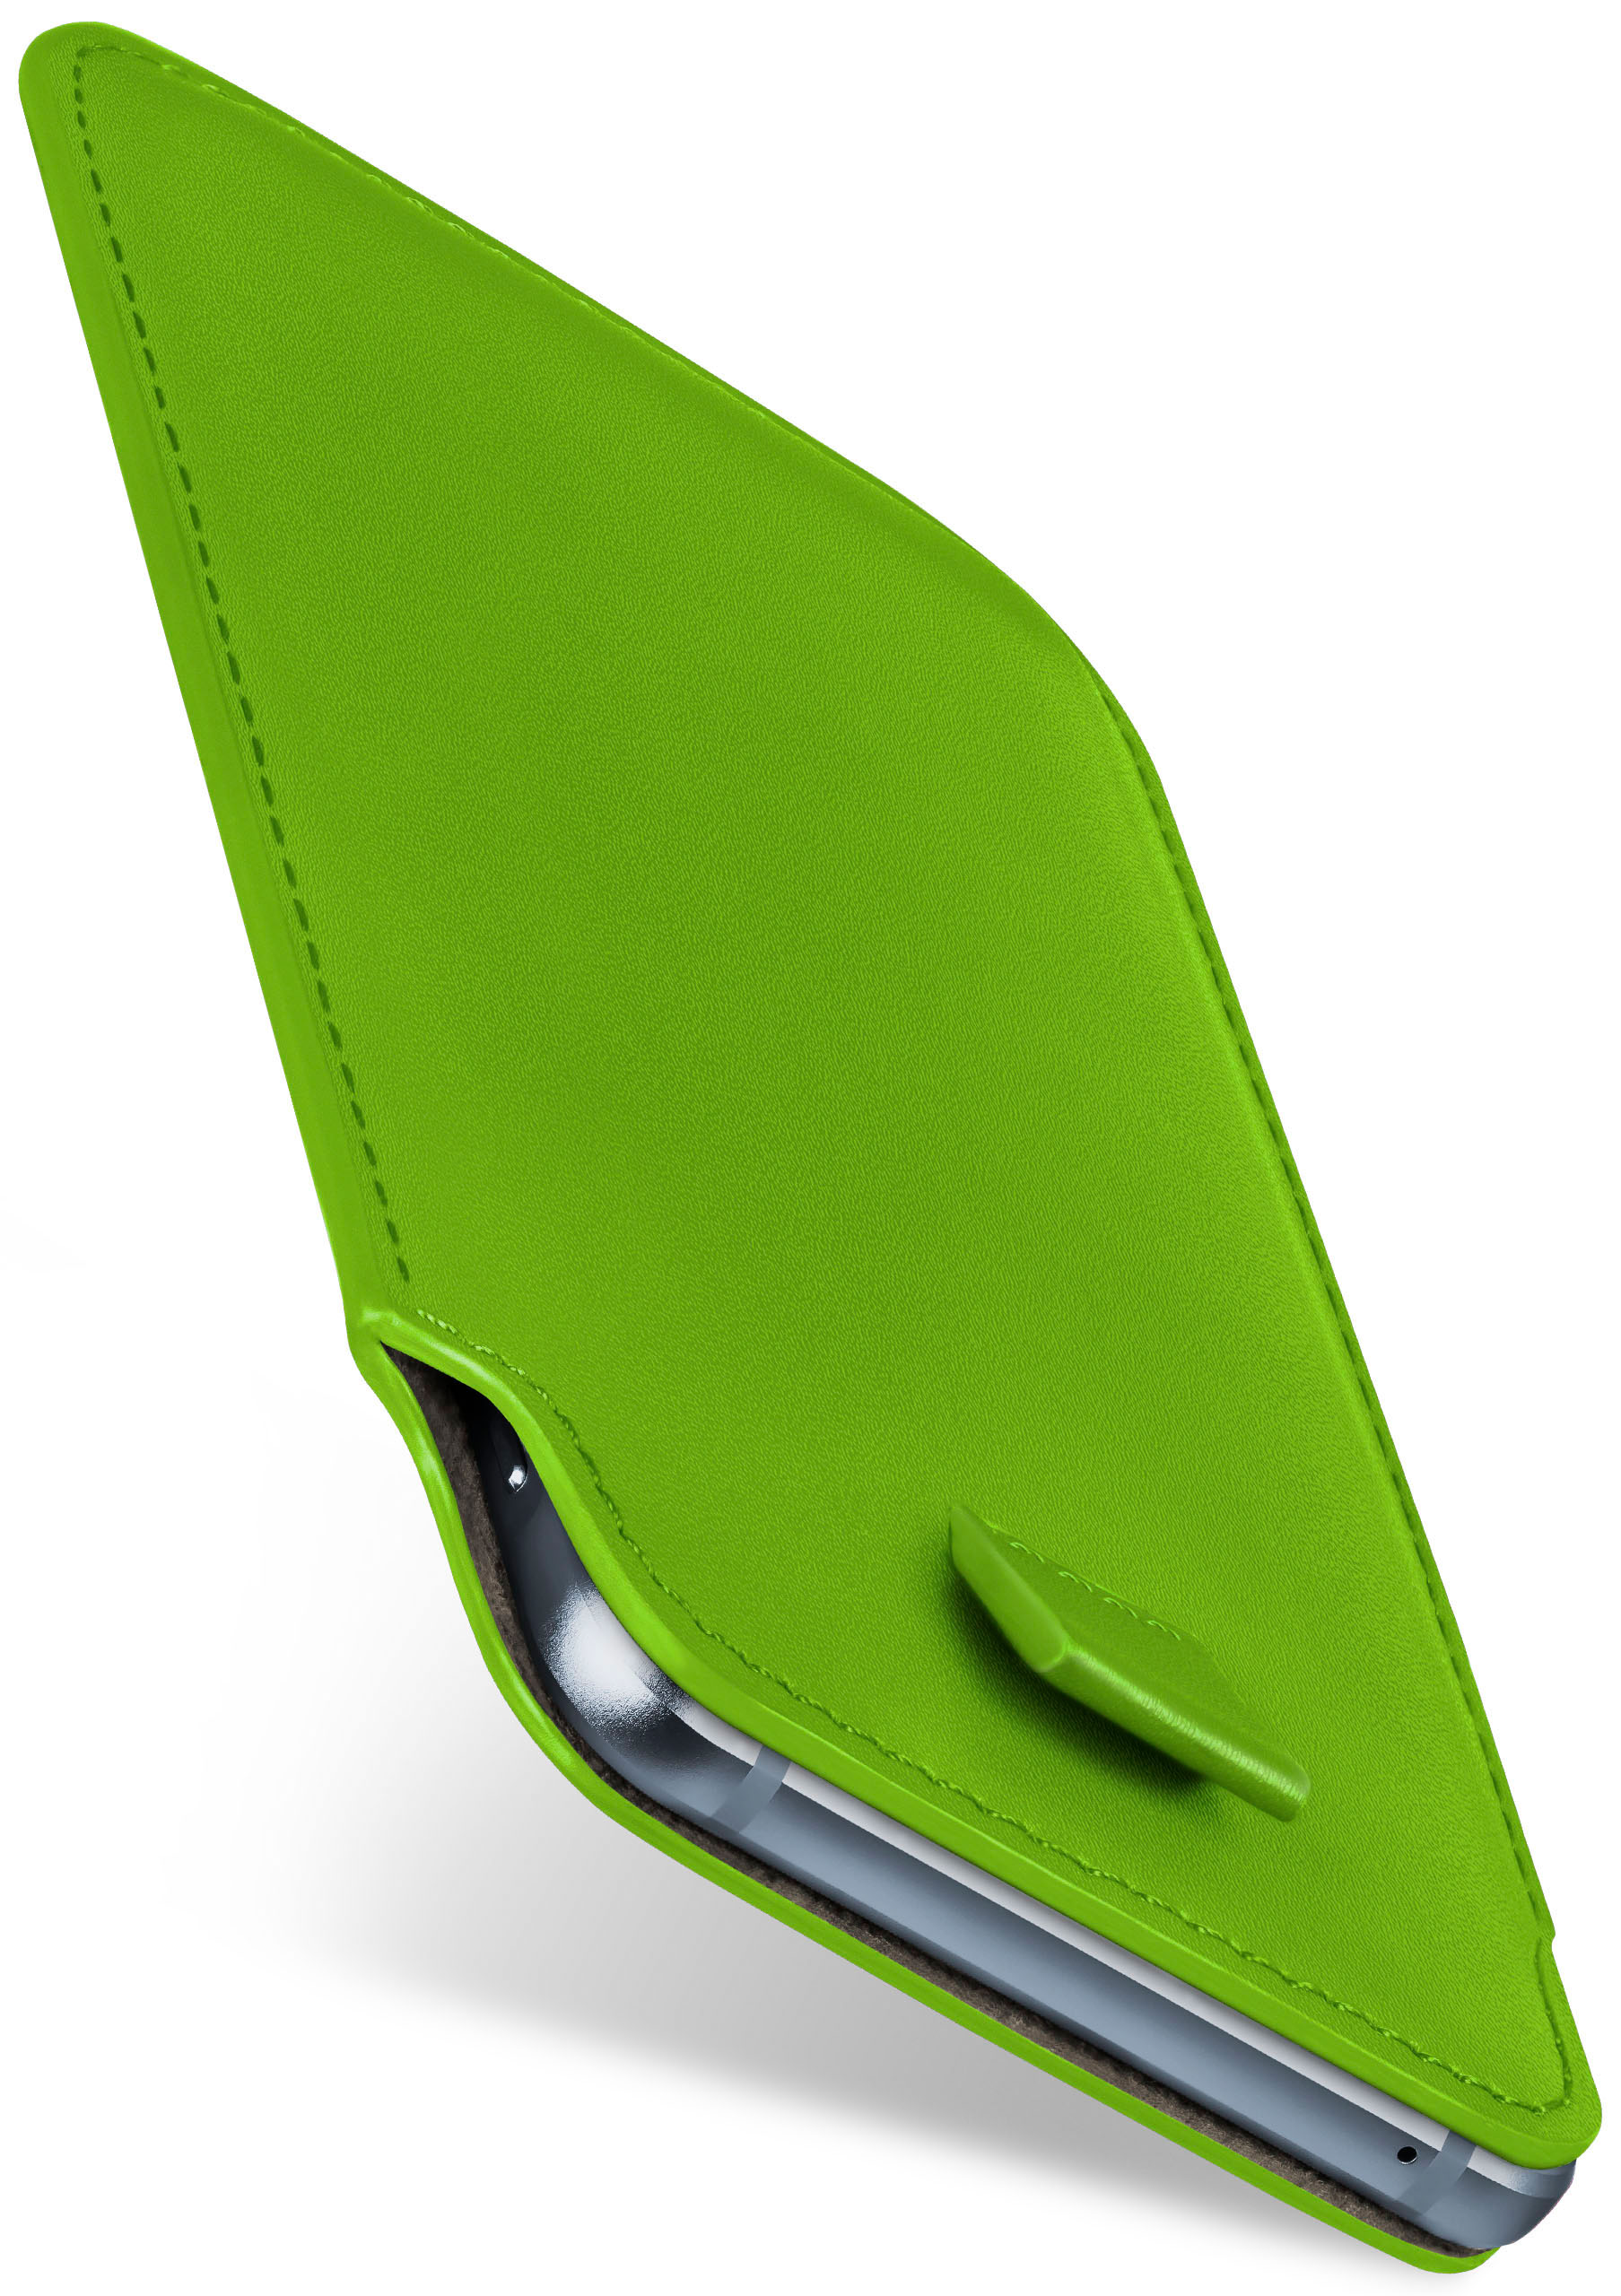 Cover, Full / Case, Neo, Galaxy Slide Samsung, S5 Lime-Green S5 MOEX